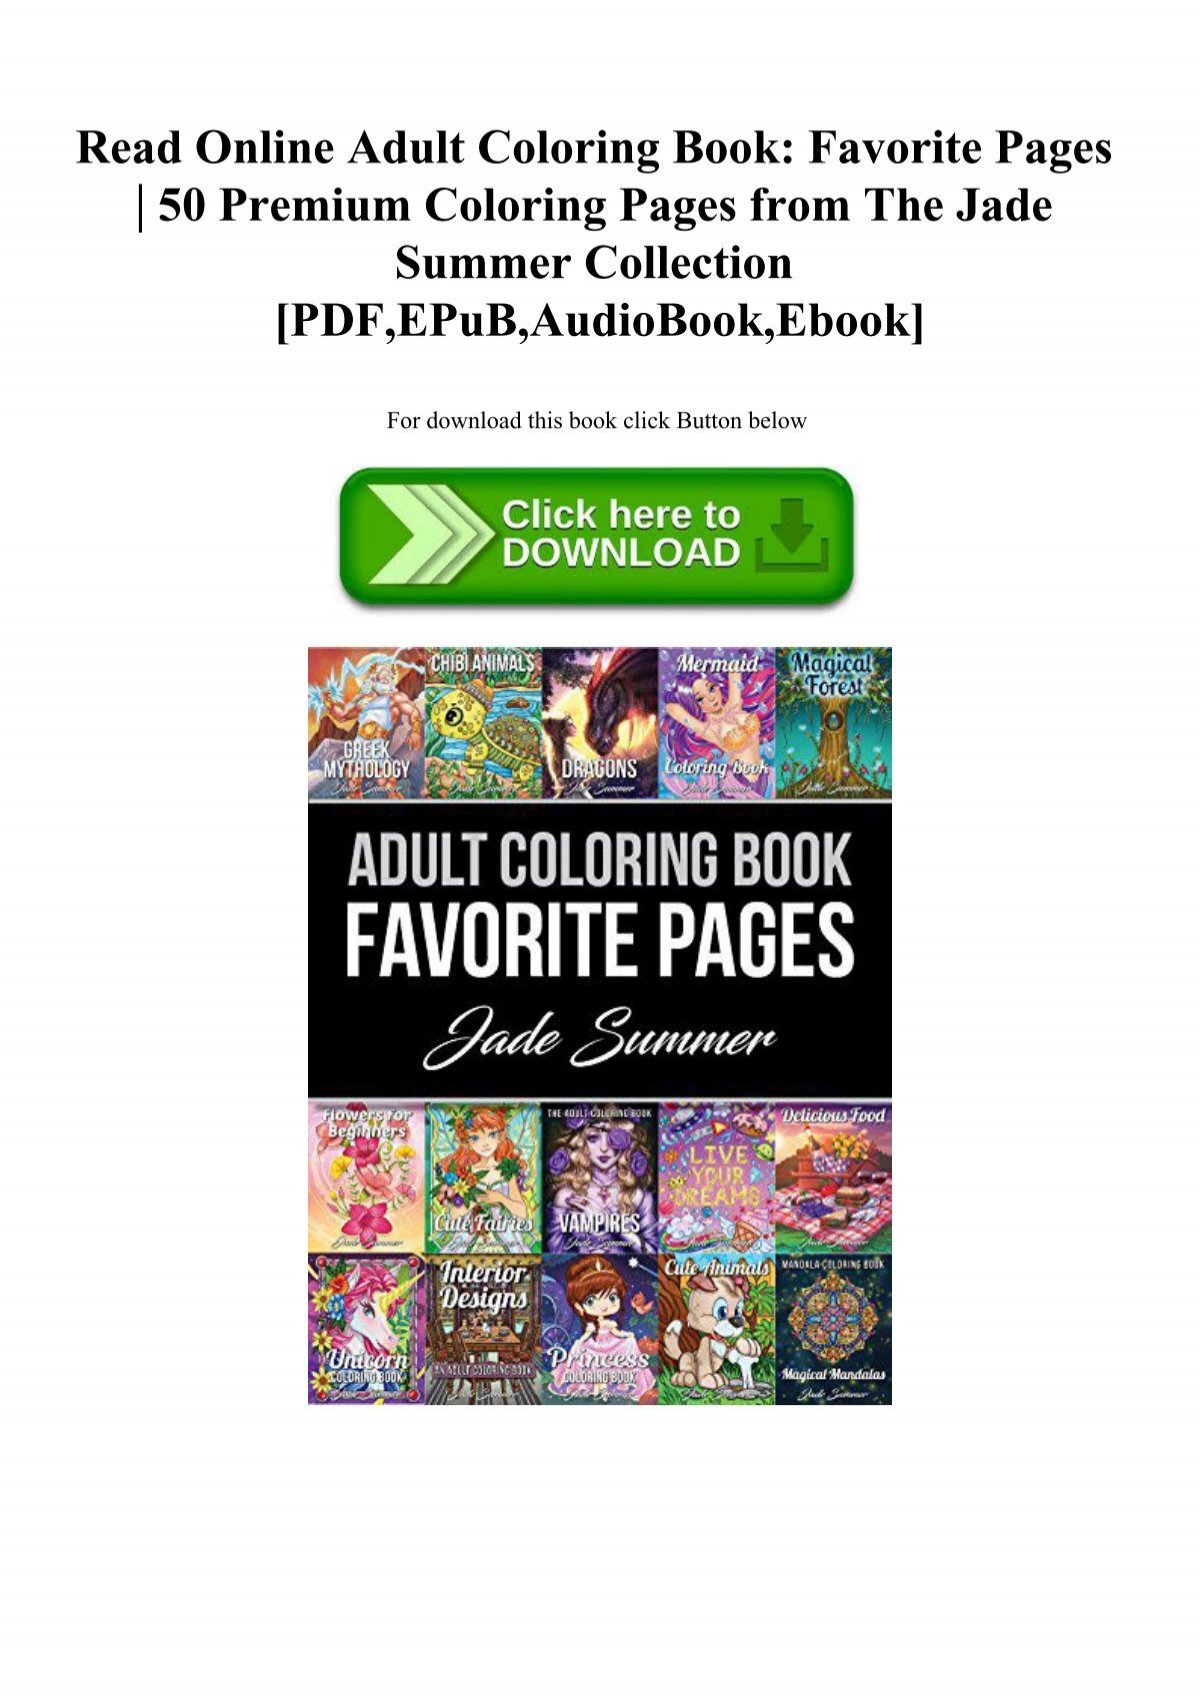 read online adult coloring book favorite pages 50 premium